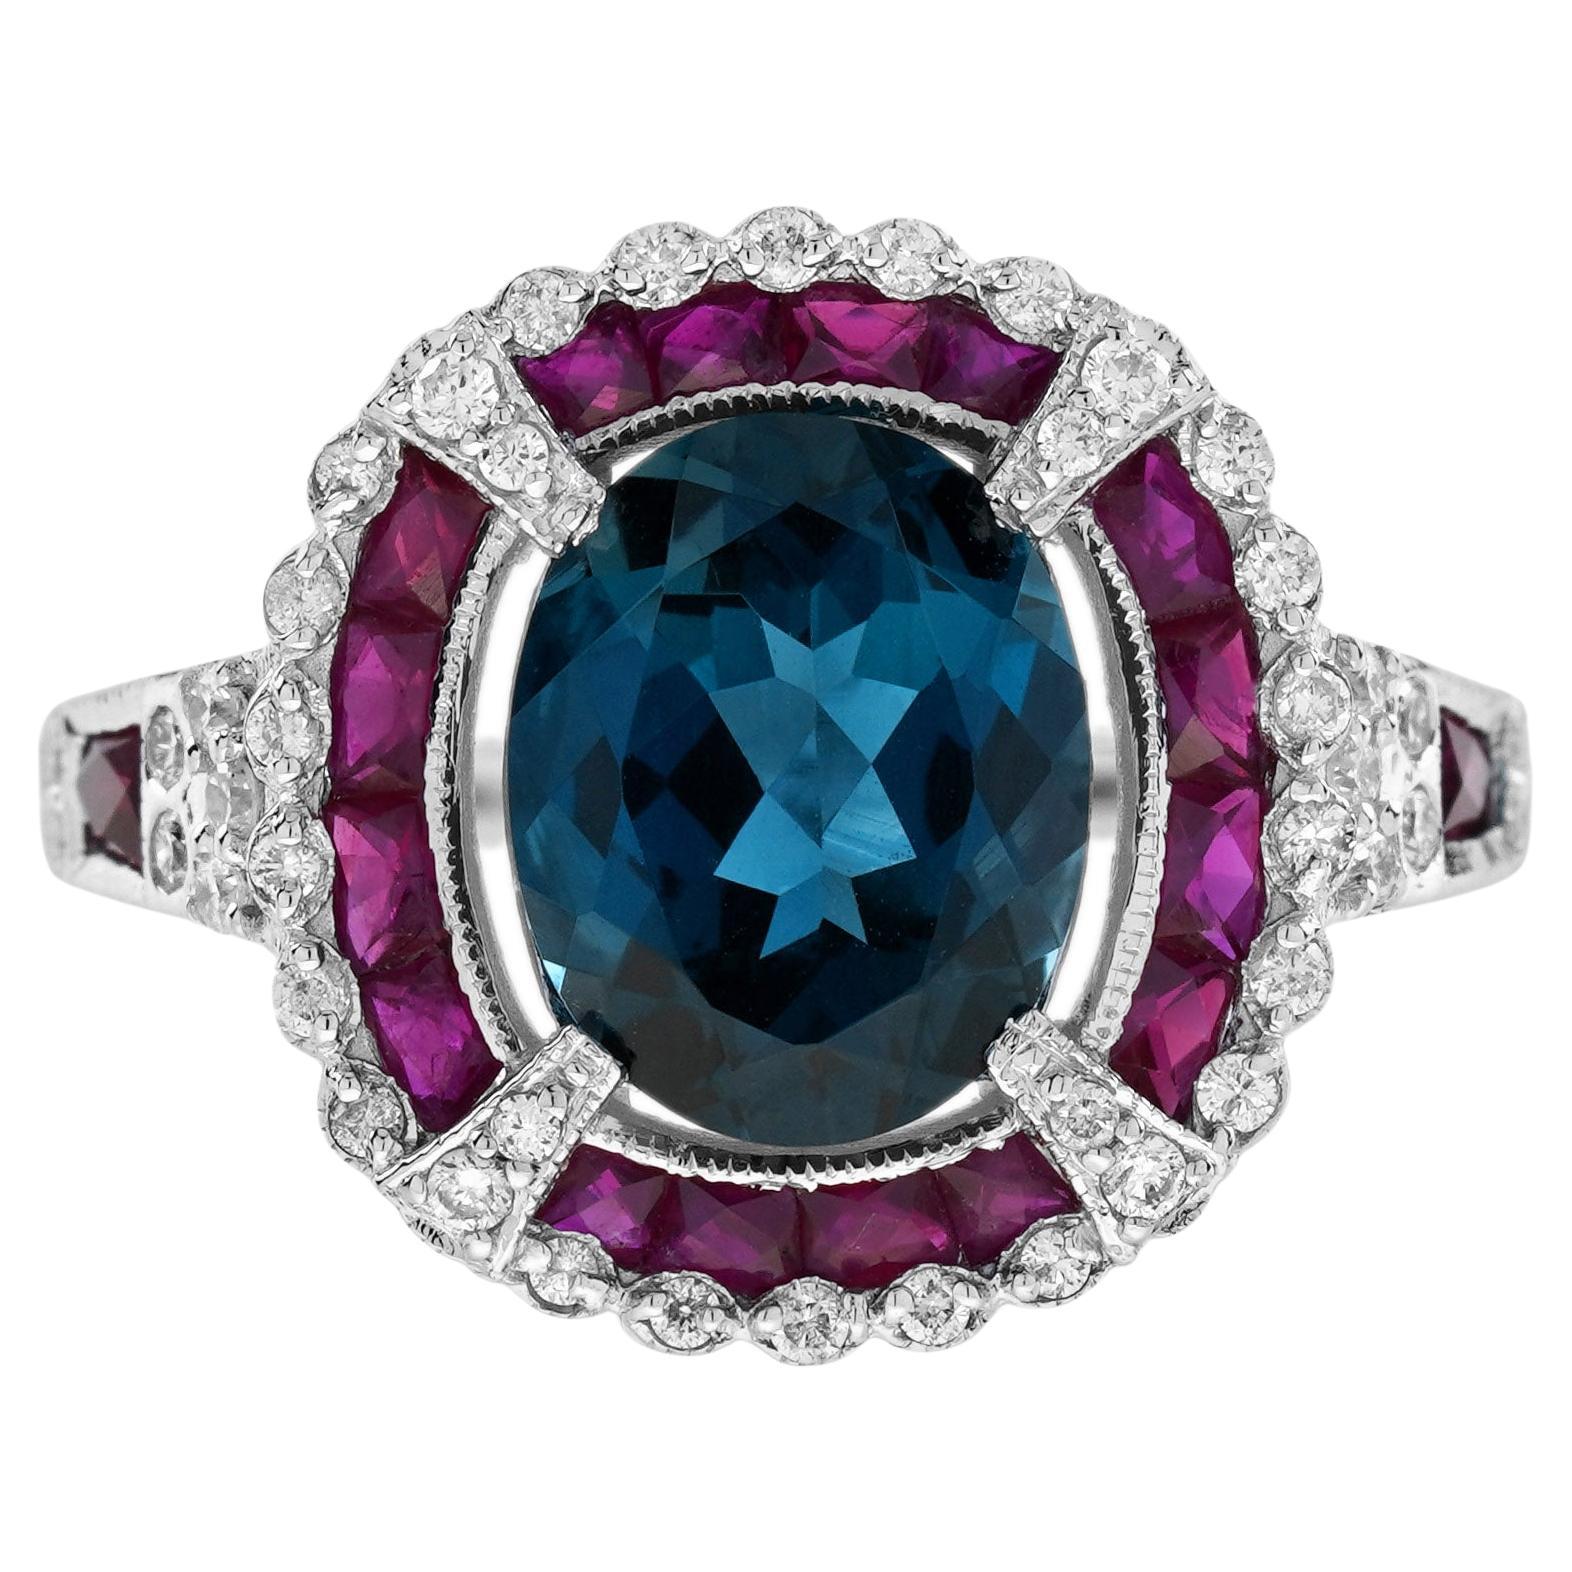 London Blue Topaz Ruby and Diamond Art Deco Style Halo Ring in 14K White Gold